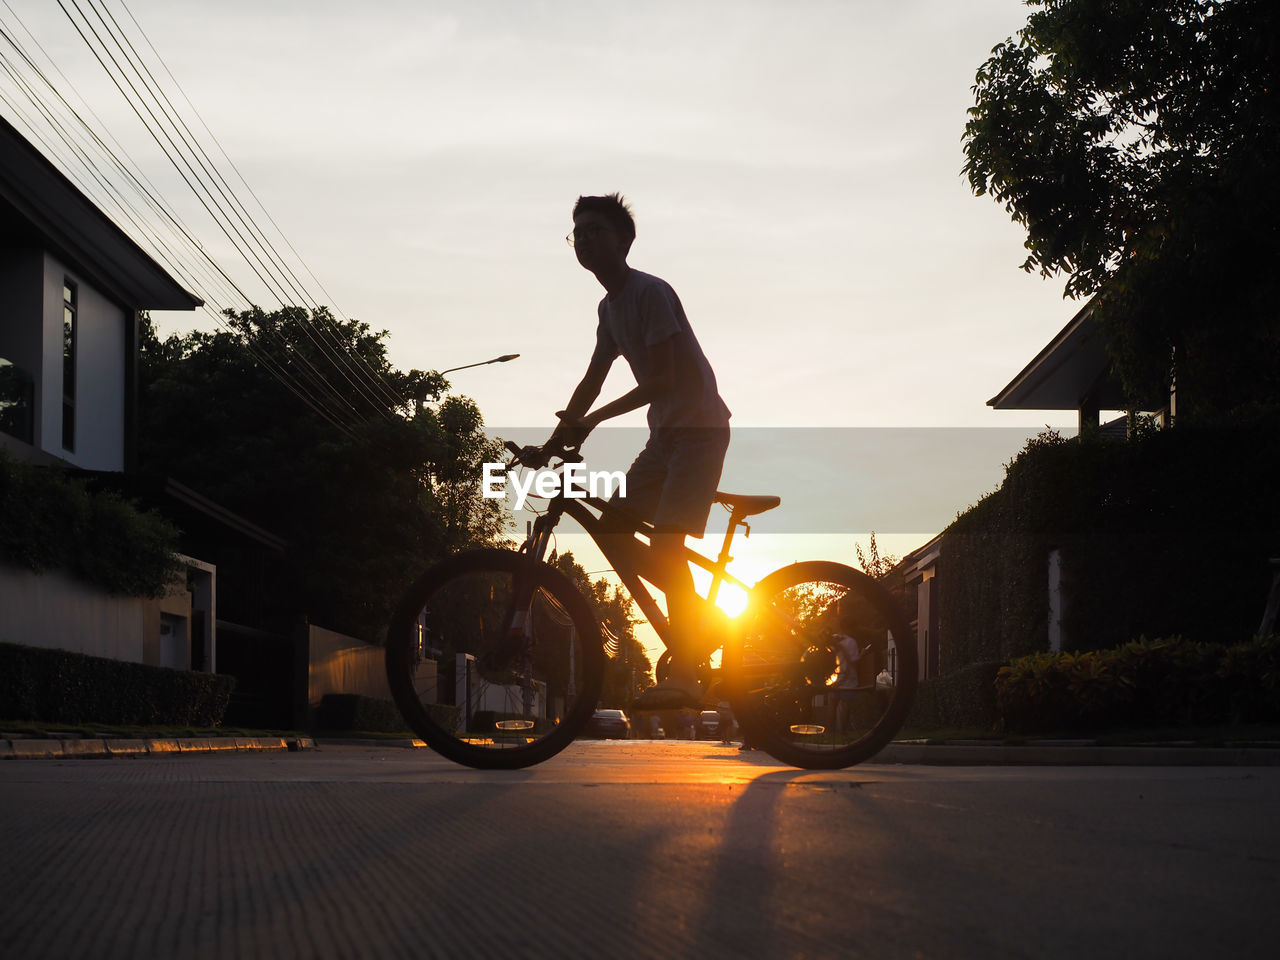 Low angle view of boy riding bicycle on street against sky during sunset